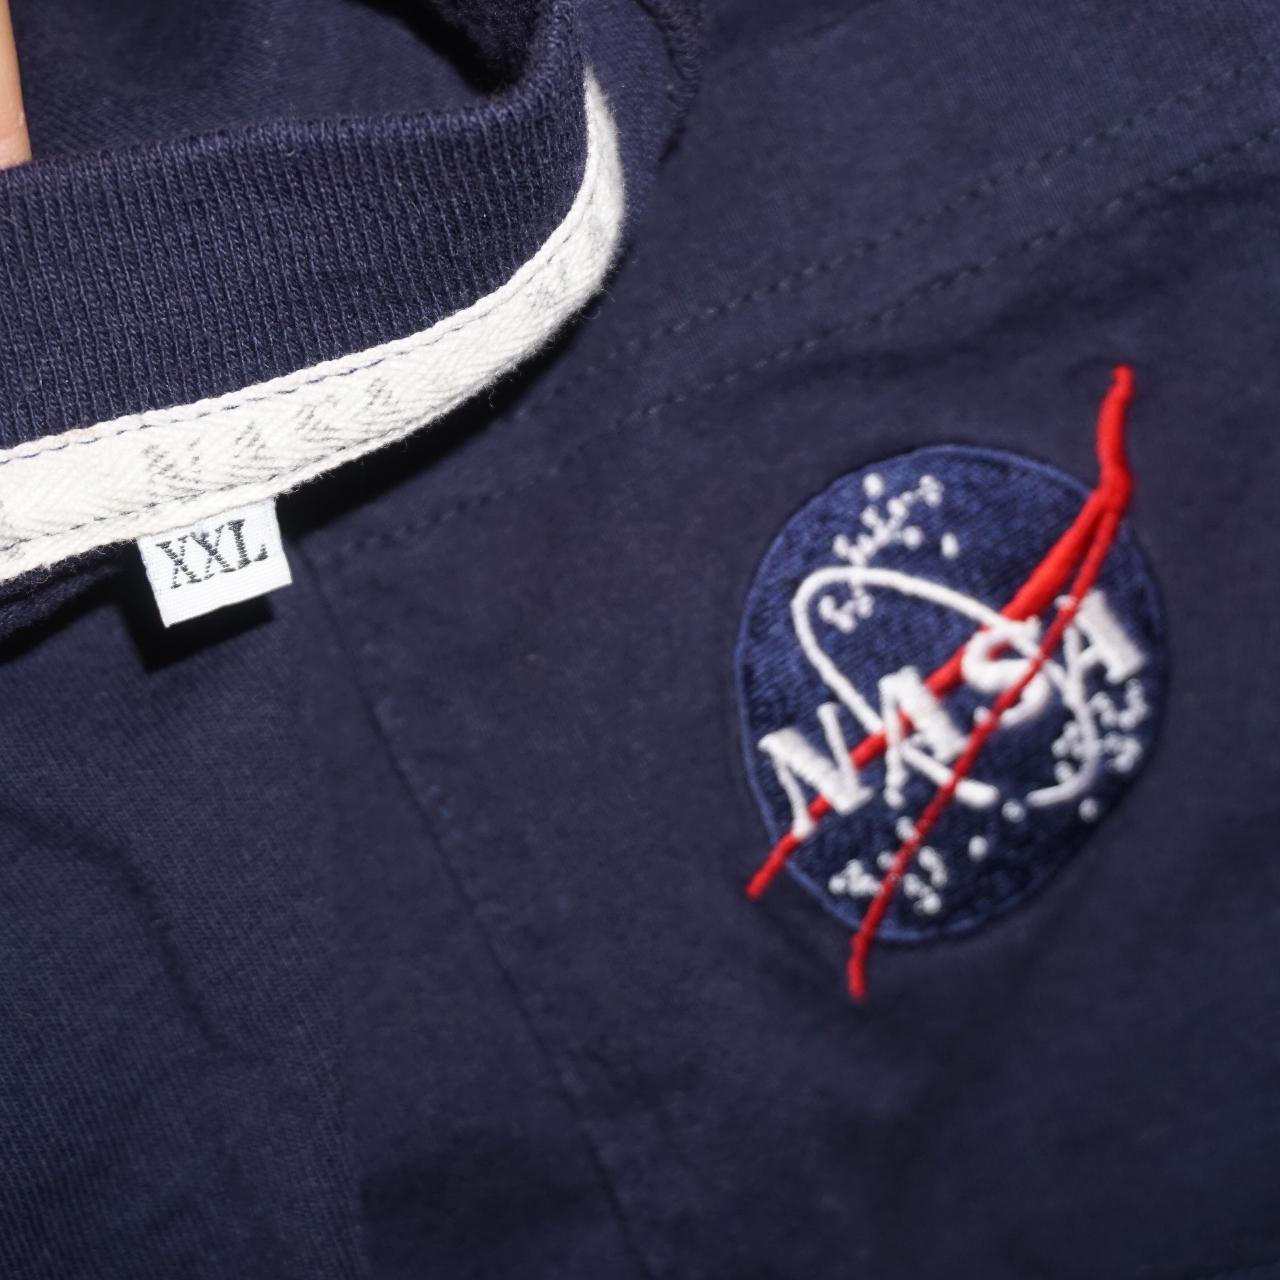 Product Image 4 - Embroidered NASA T
Size XXL

#NASA #Space